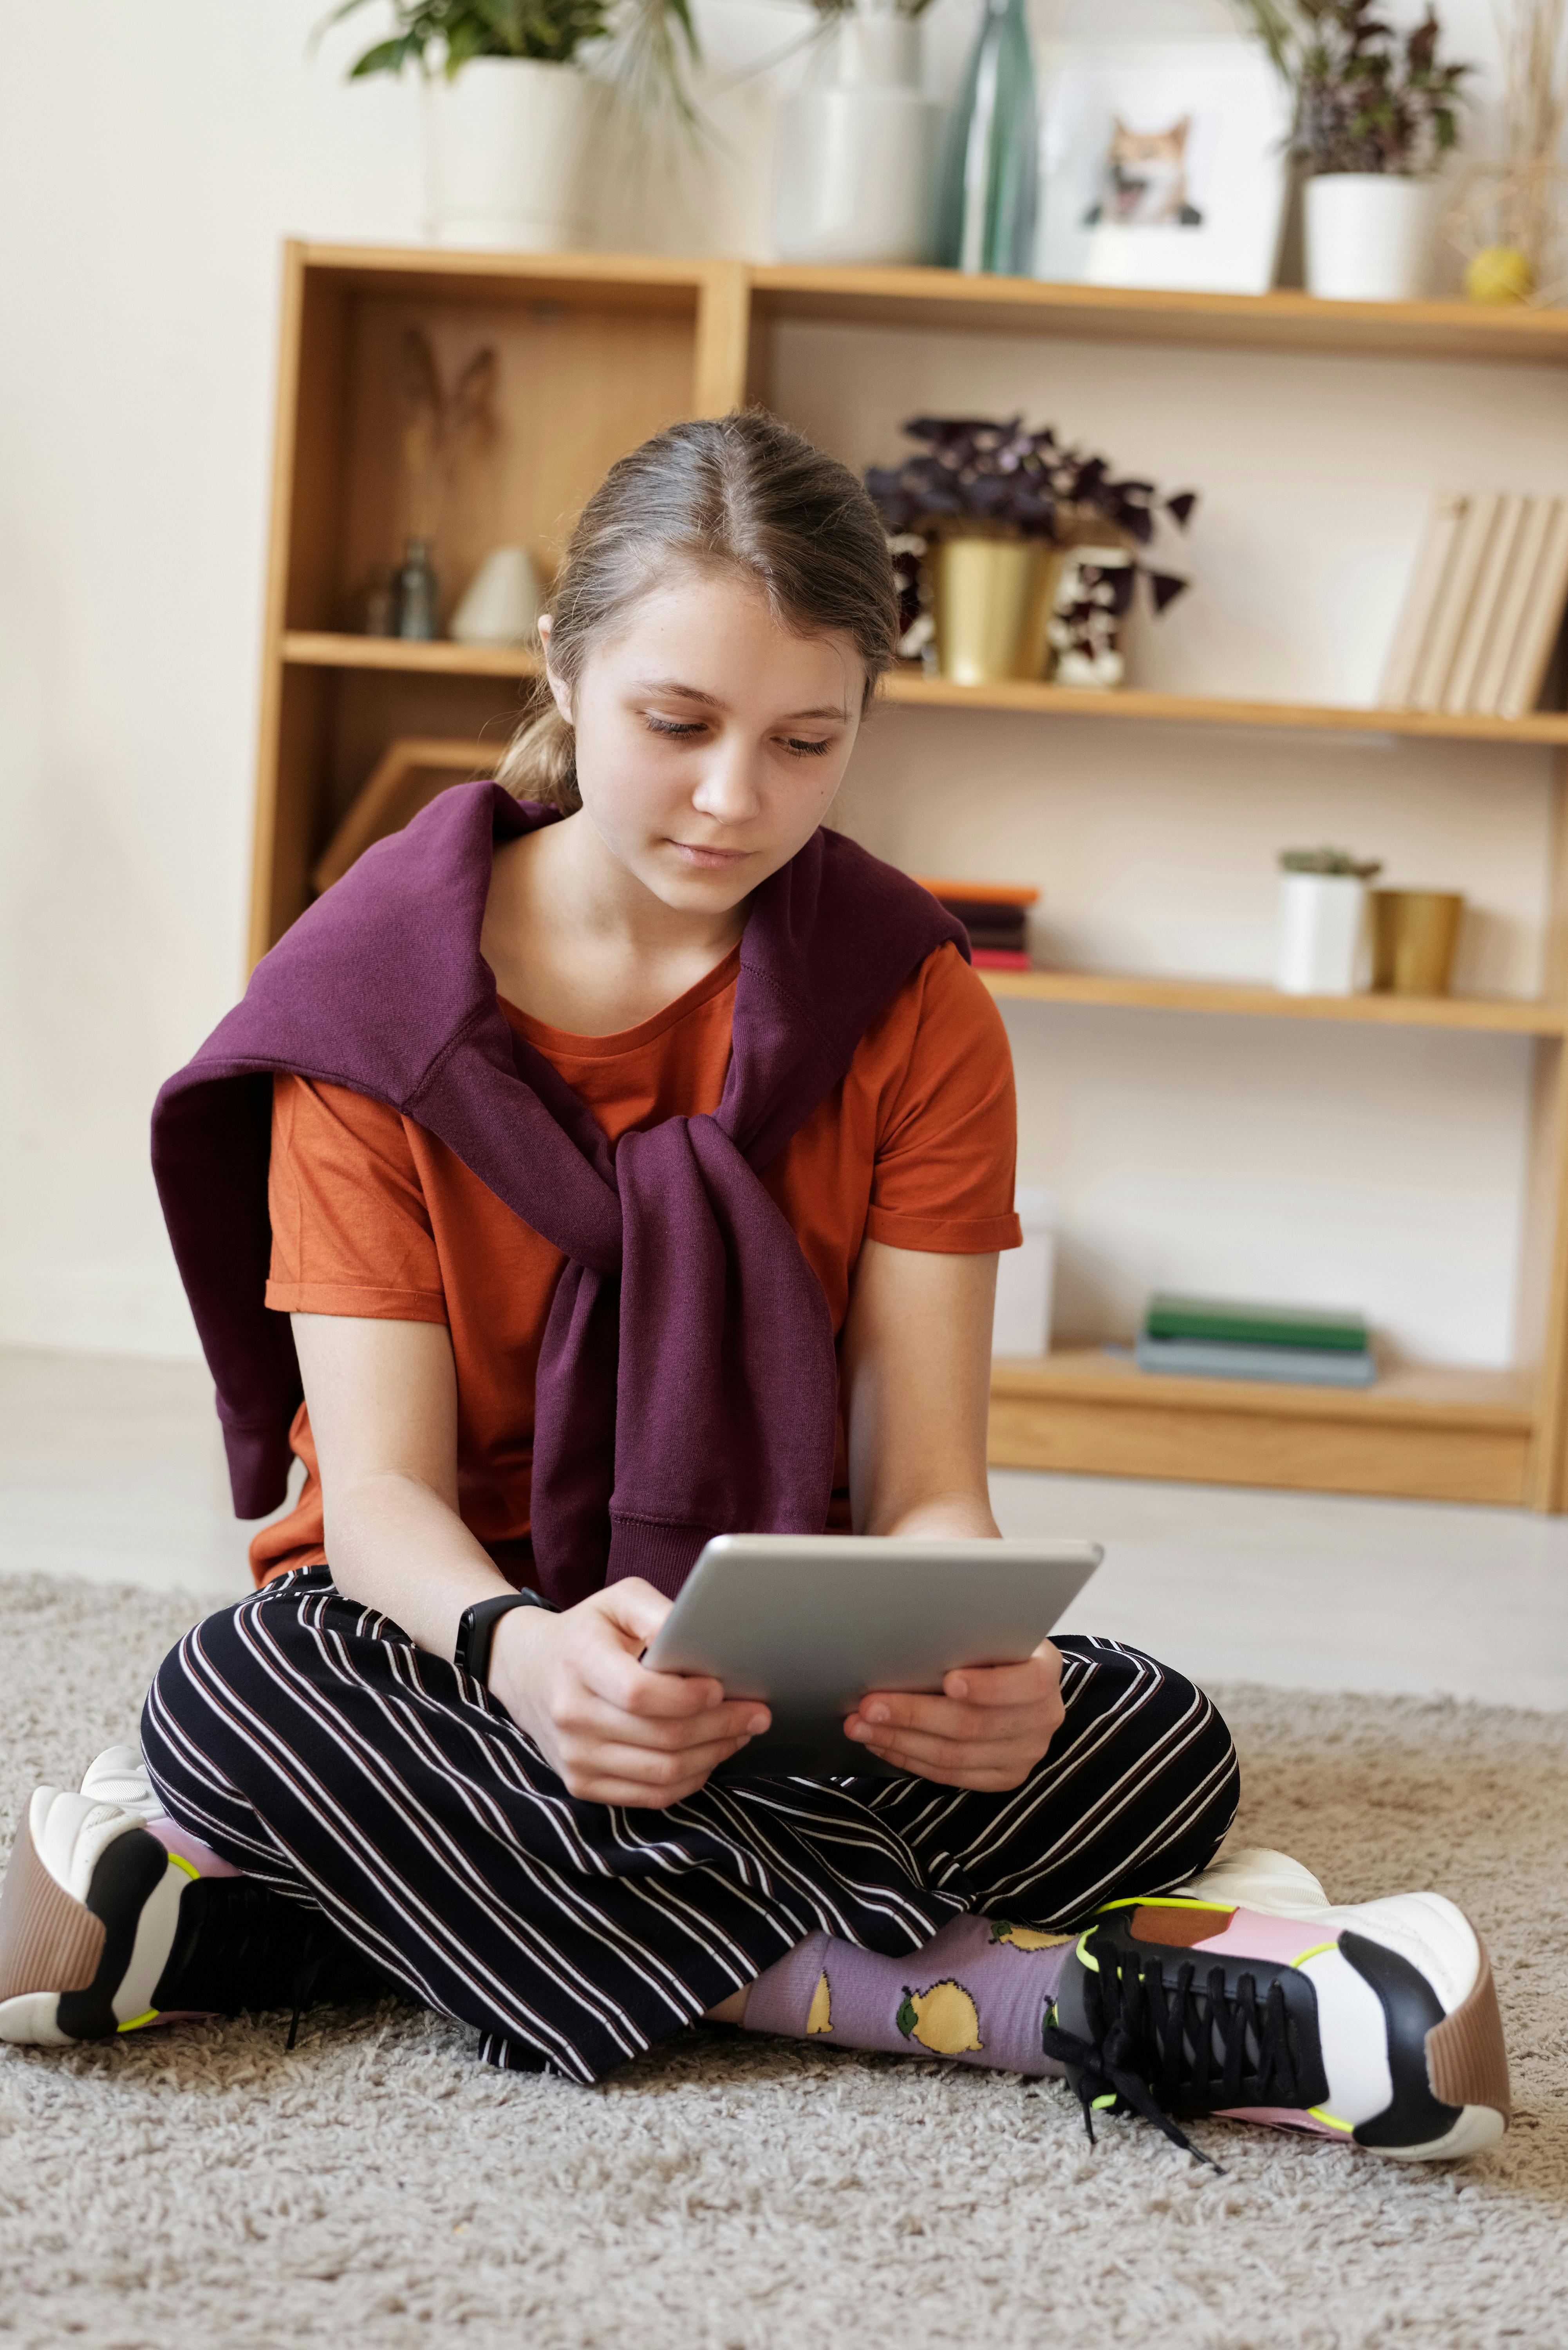 A teenage girl sitting on the floor using a tablet | Source: Pexels